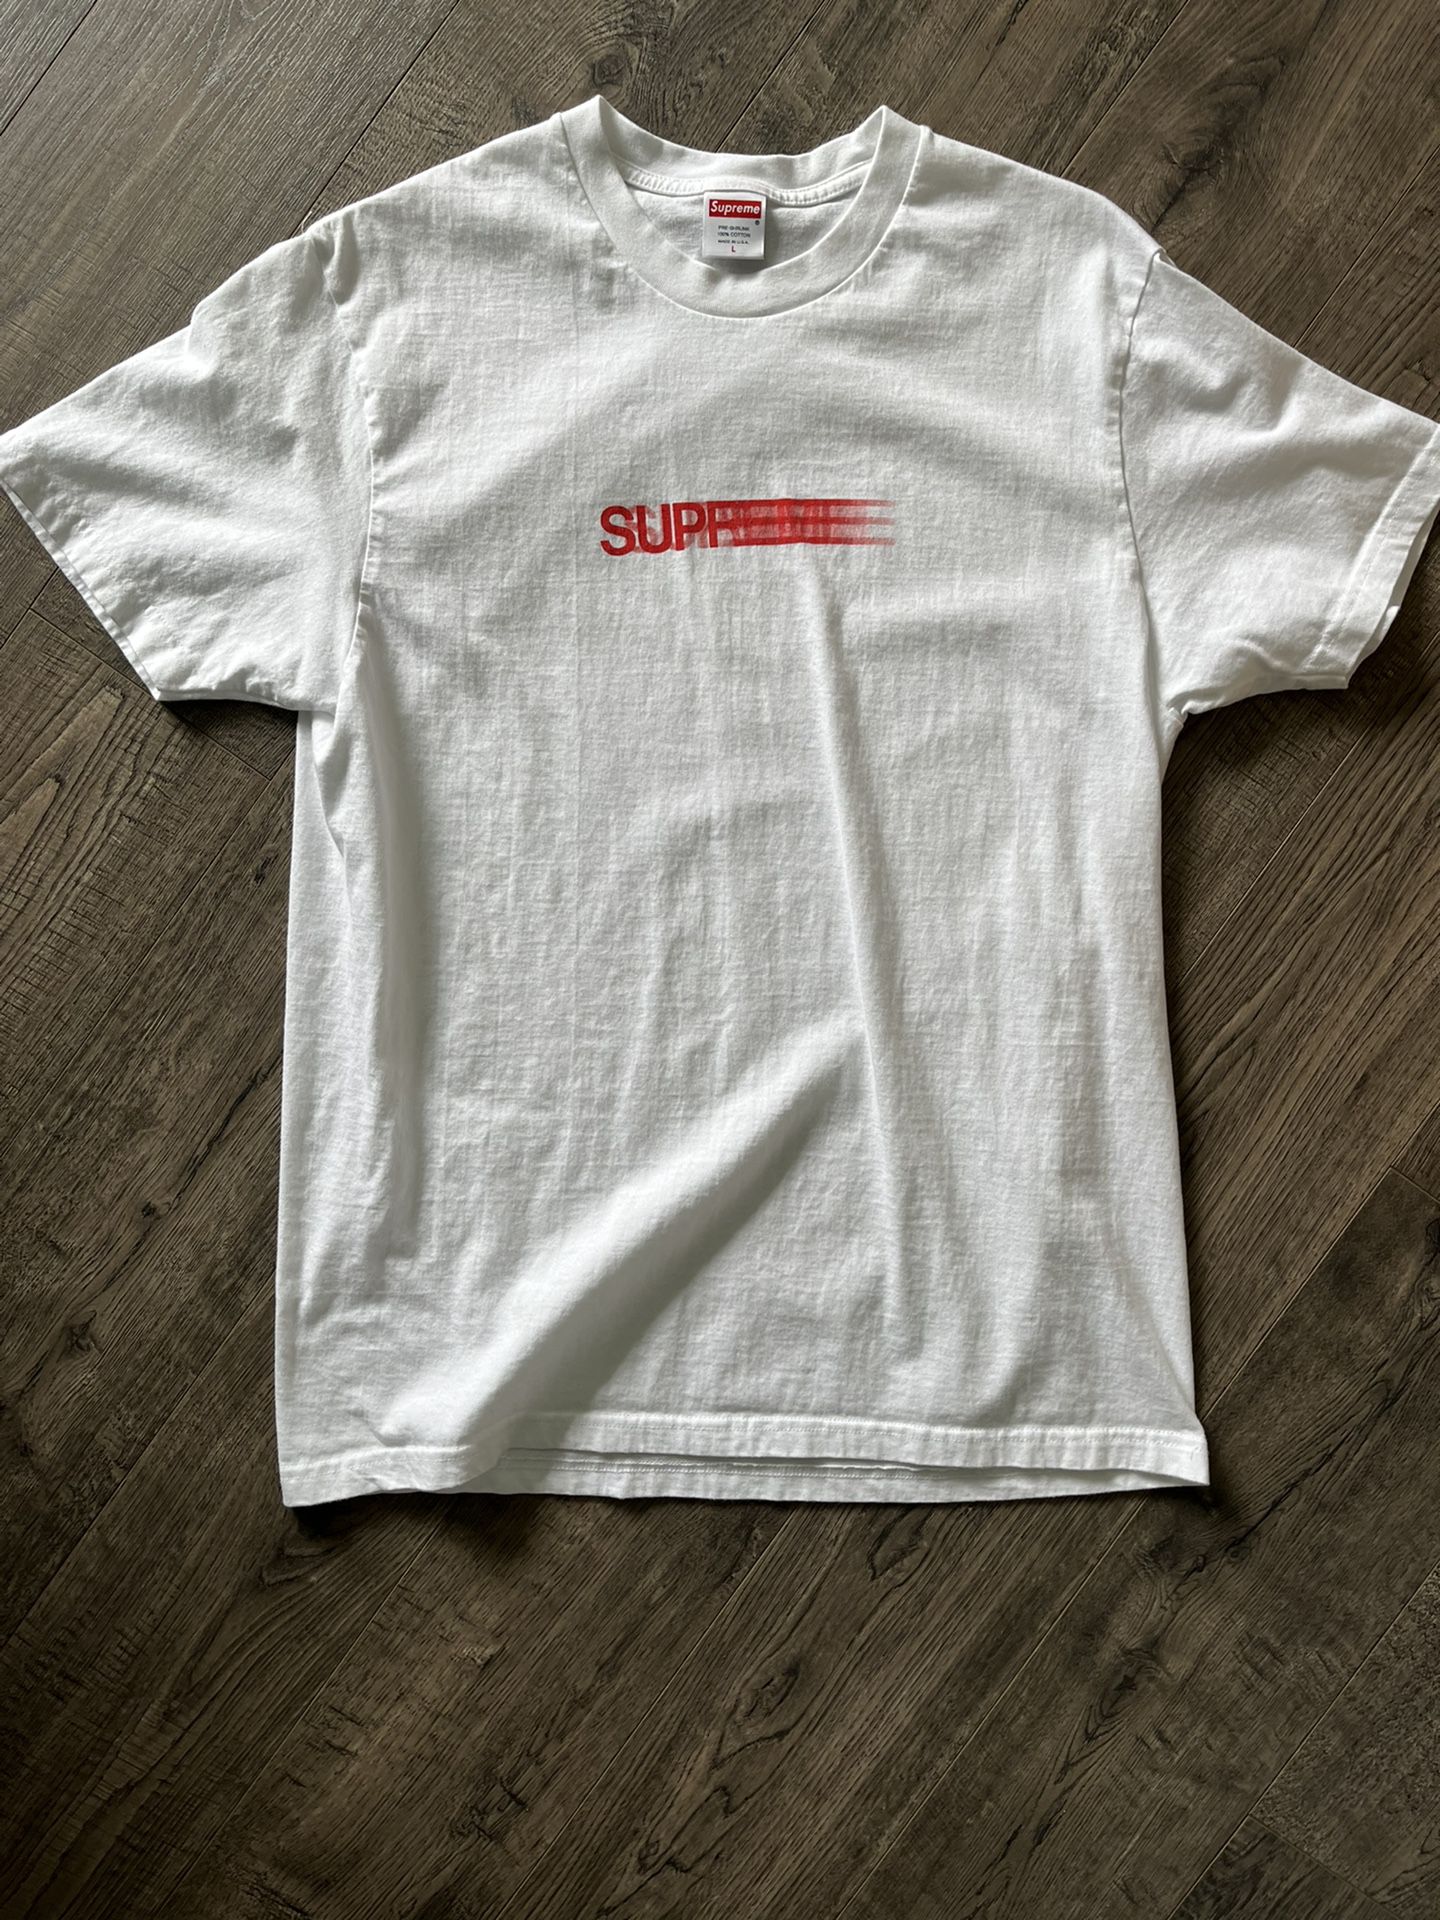 Supreme motion blur tee for Sale in Bothell, WA - OfferUp